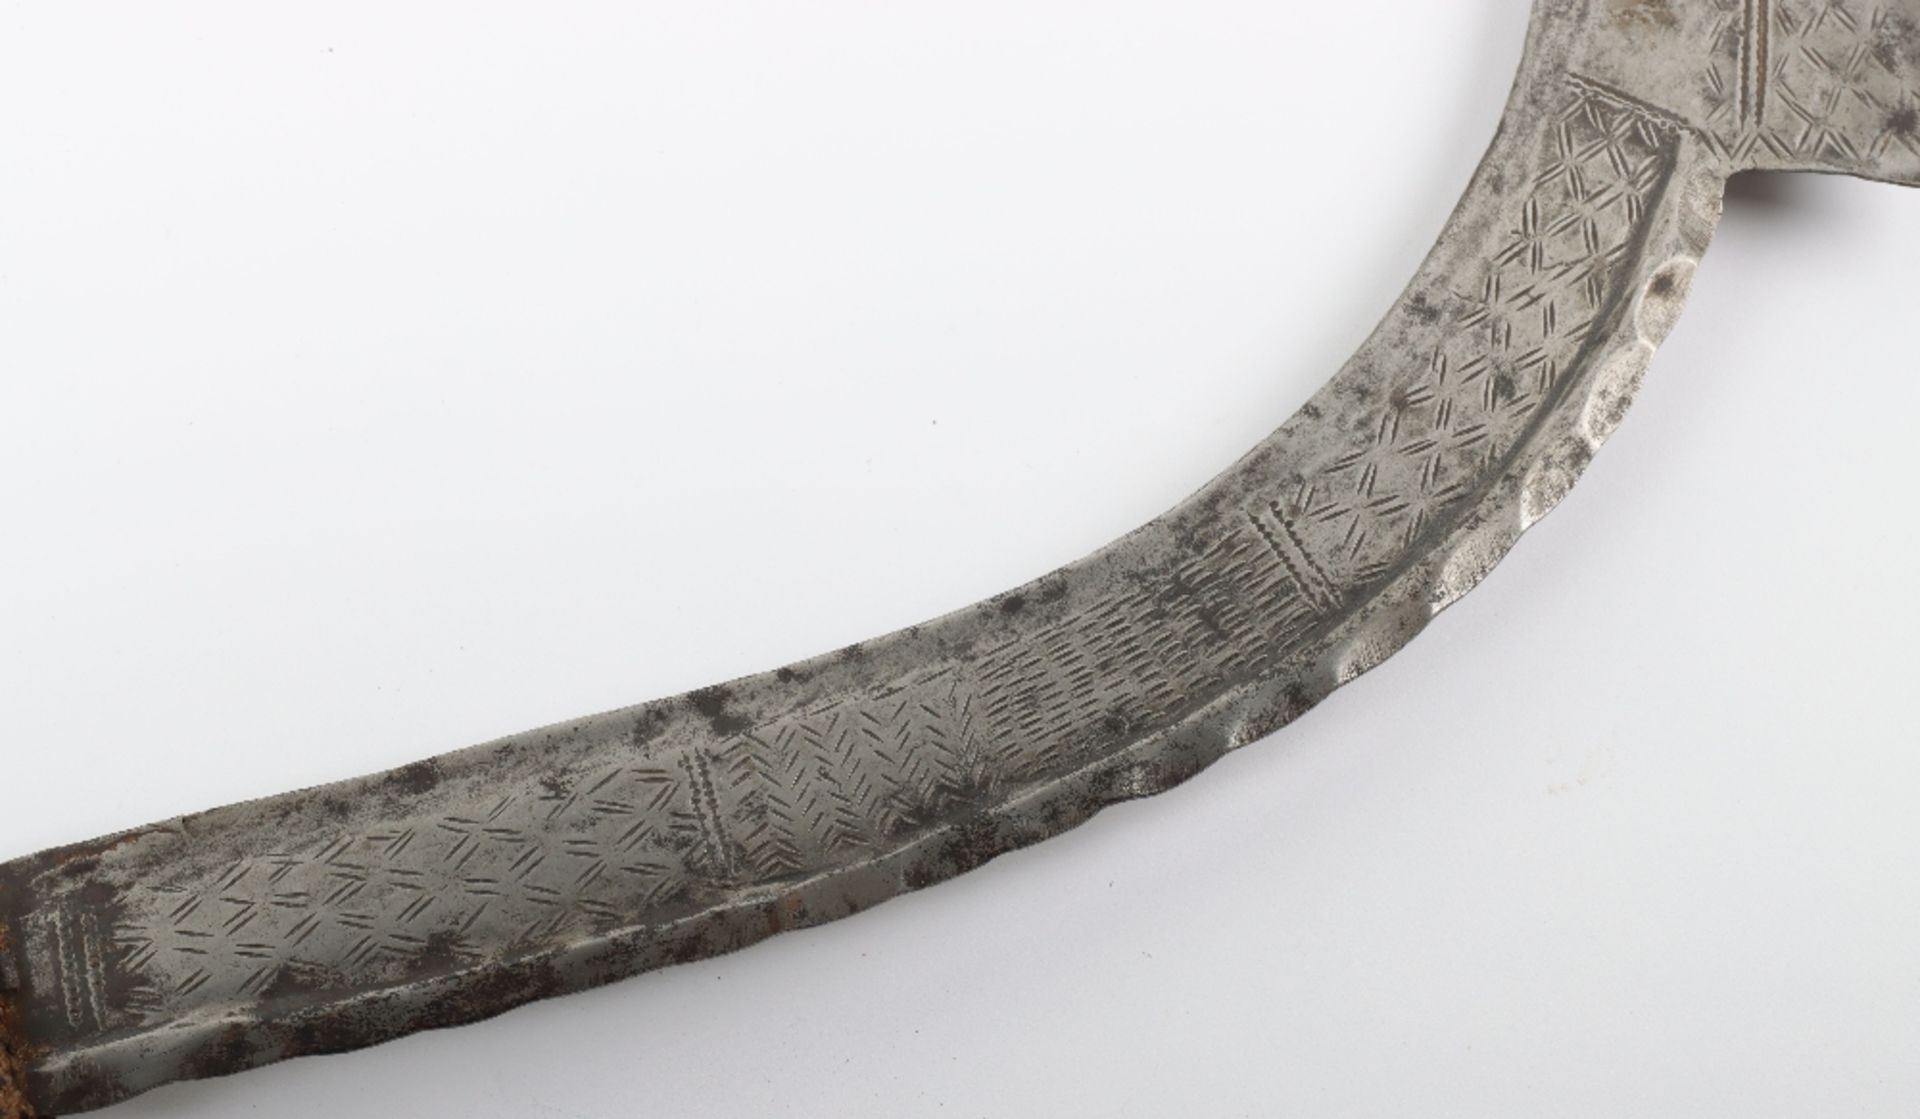 Large Curved Banza Throwing Knife Used by the Azande of Southern Sudan - Bild 5 aus 9